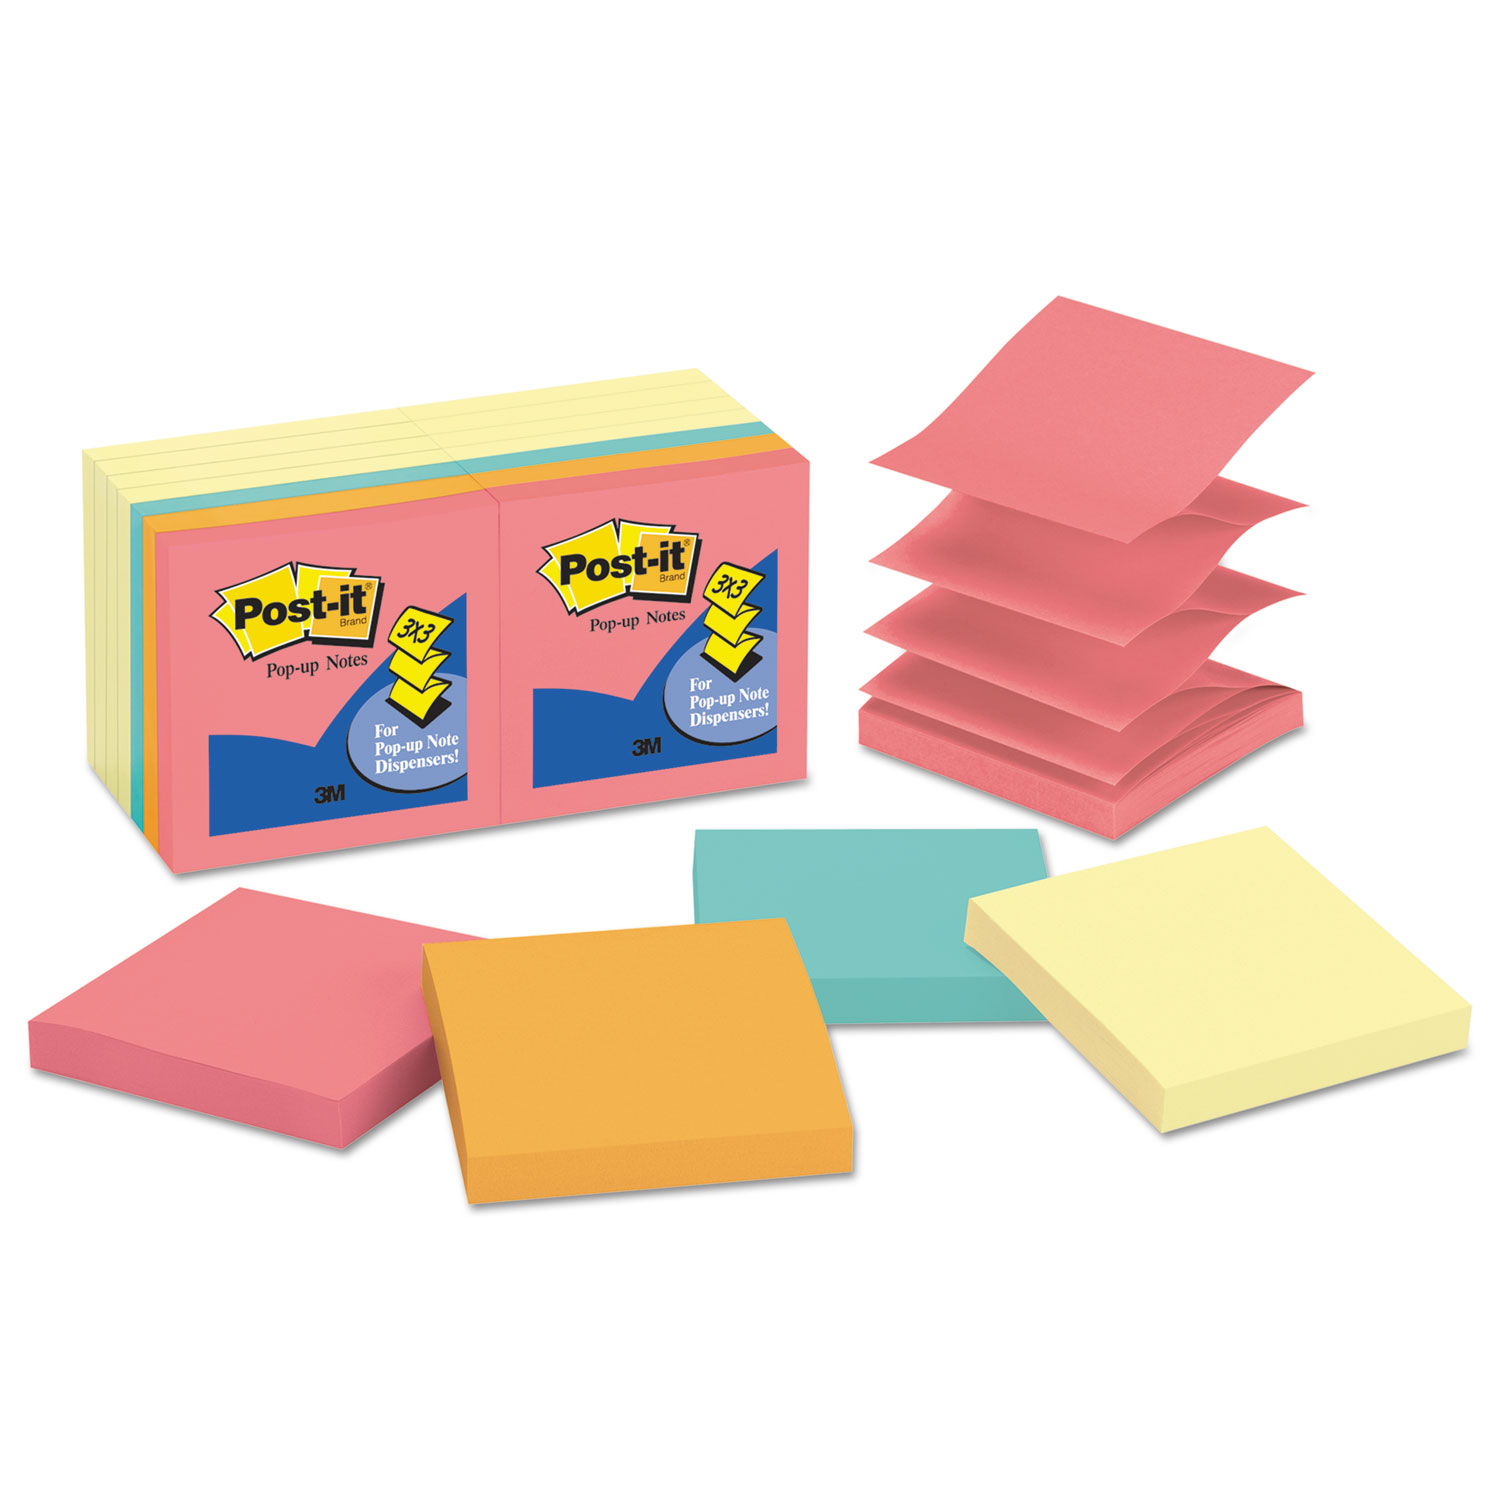 Original Pop-up Notes Value Pack, 3 x 3, Canary Yellow/Cape Town, 100-Sheet